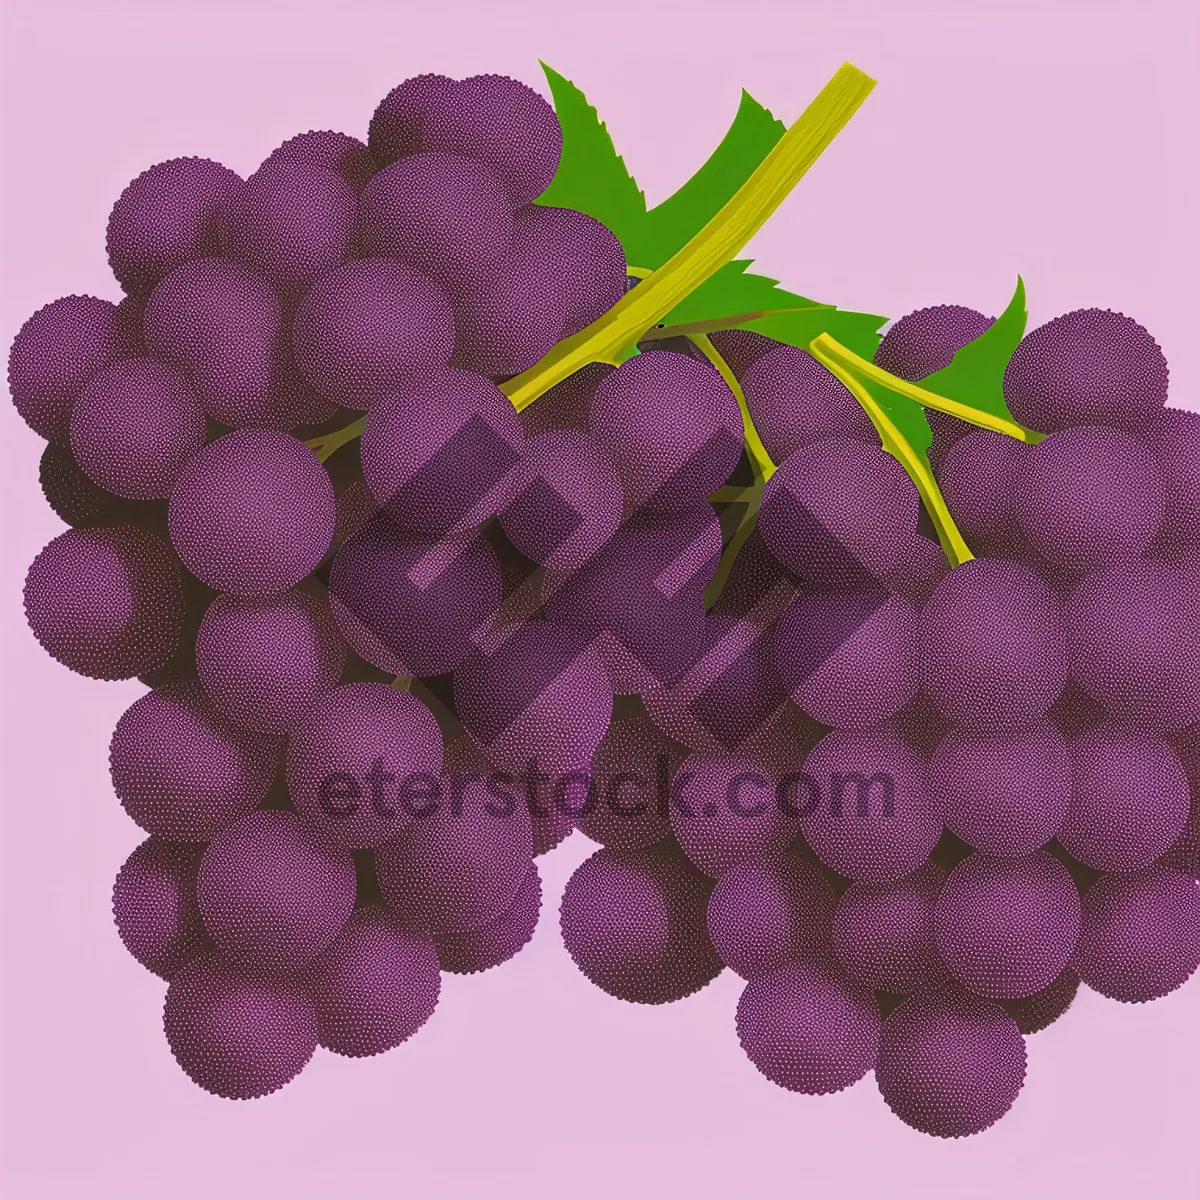 Picture of Fresh Autumn Harvest: Juicy Purple Grapes in Vineyard